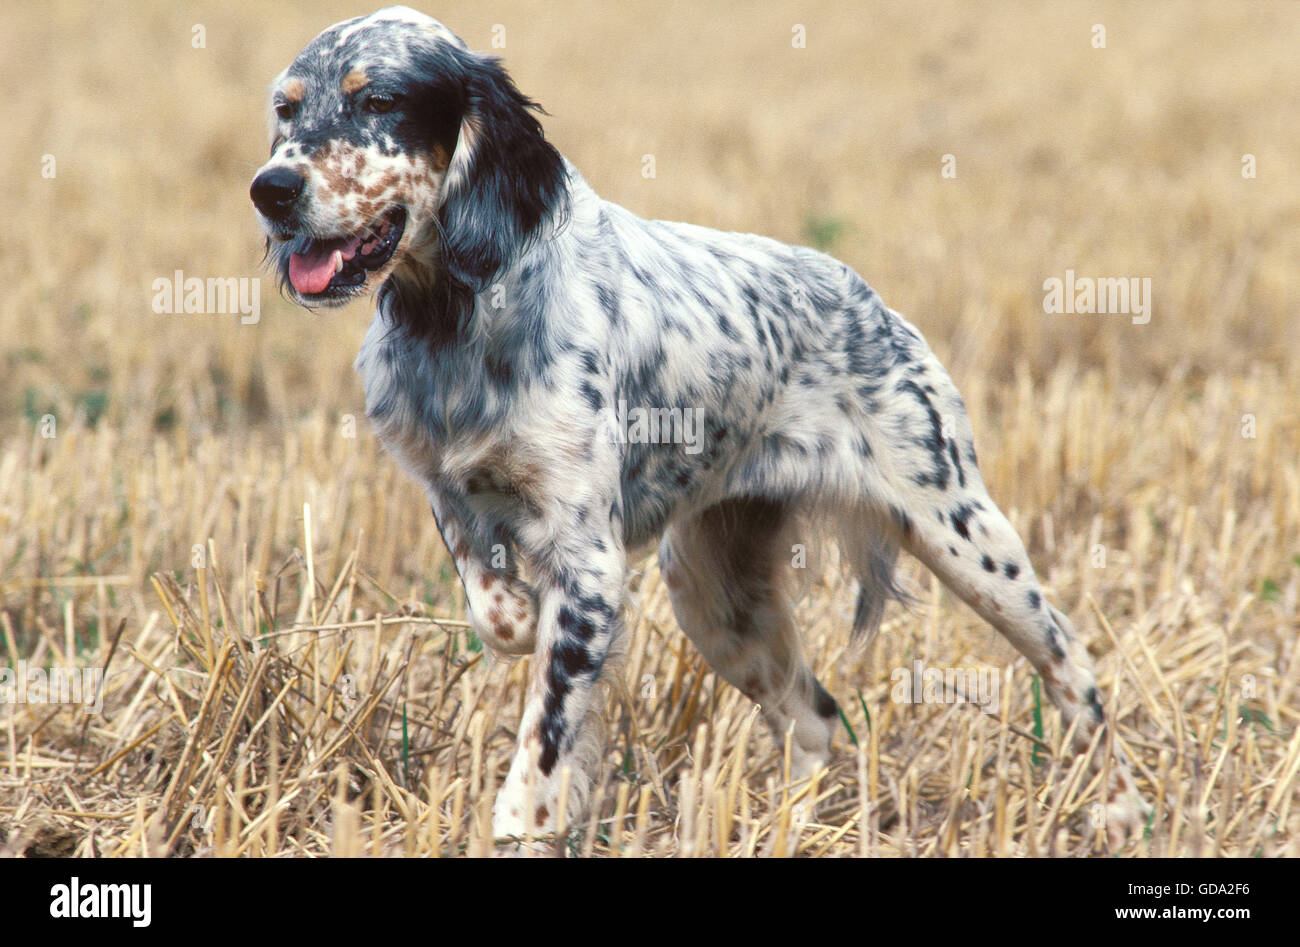 English Setter Dog in Field Stock Photo